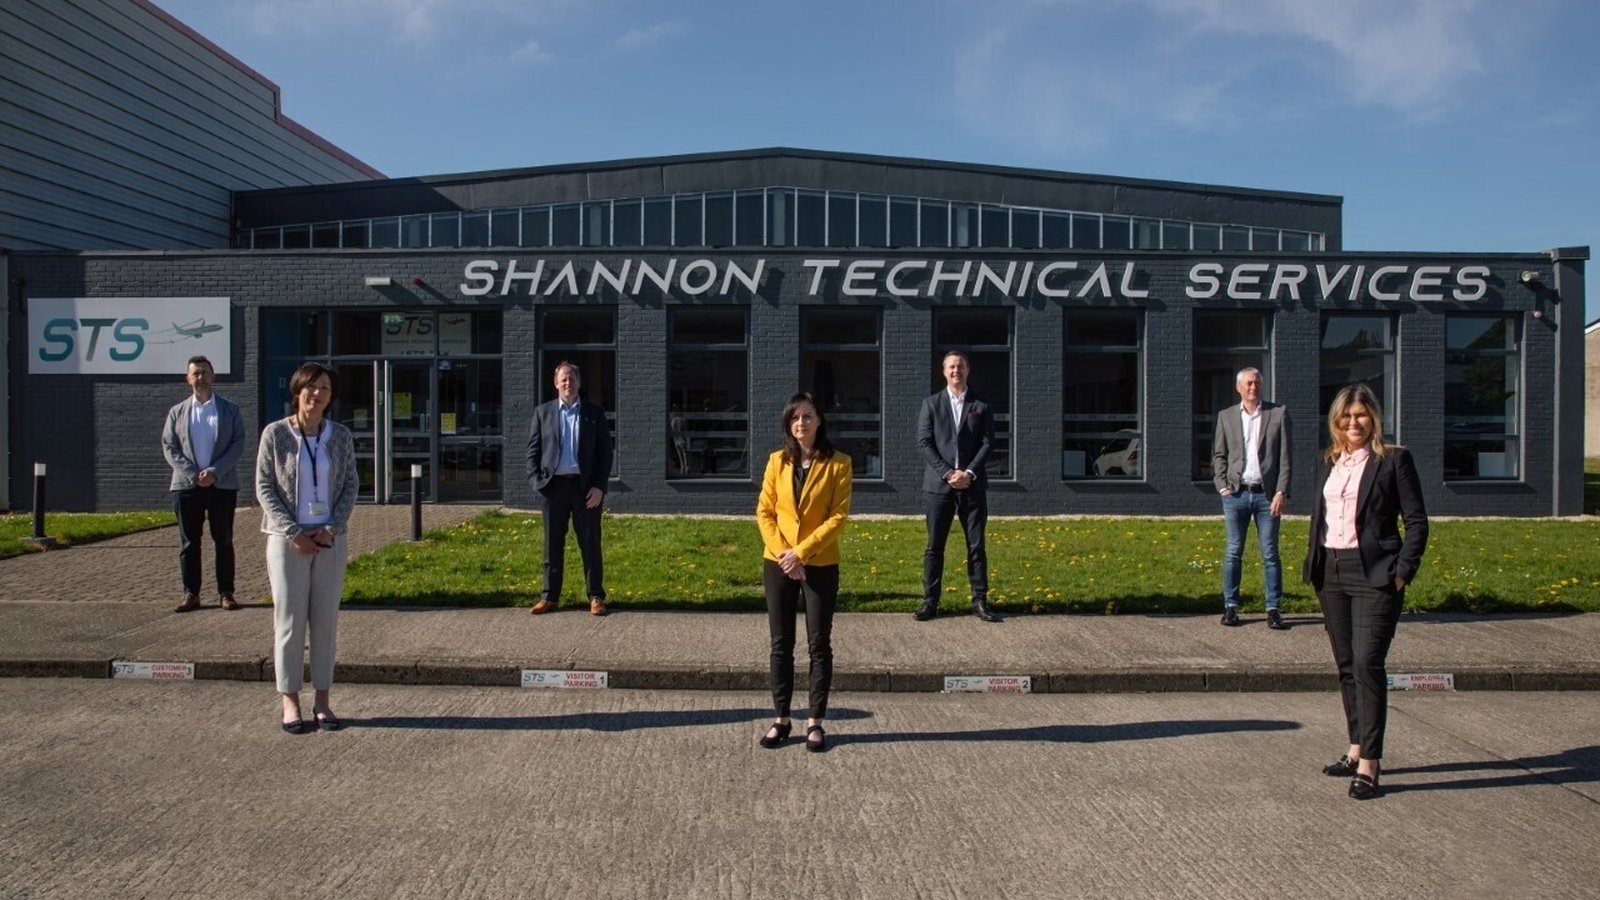 Shannon Technical Services has announced that it will create 80 new jobs by the end of 2023